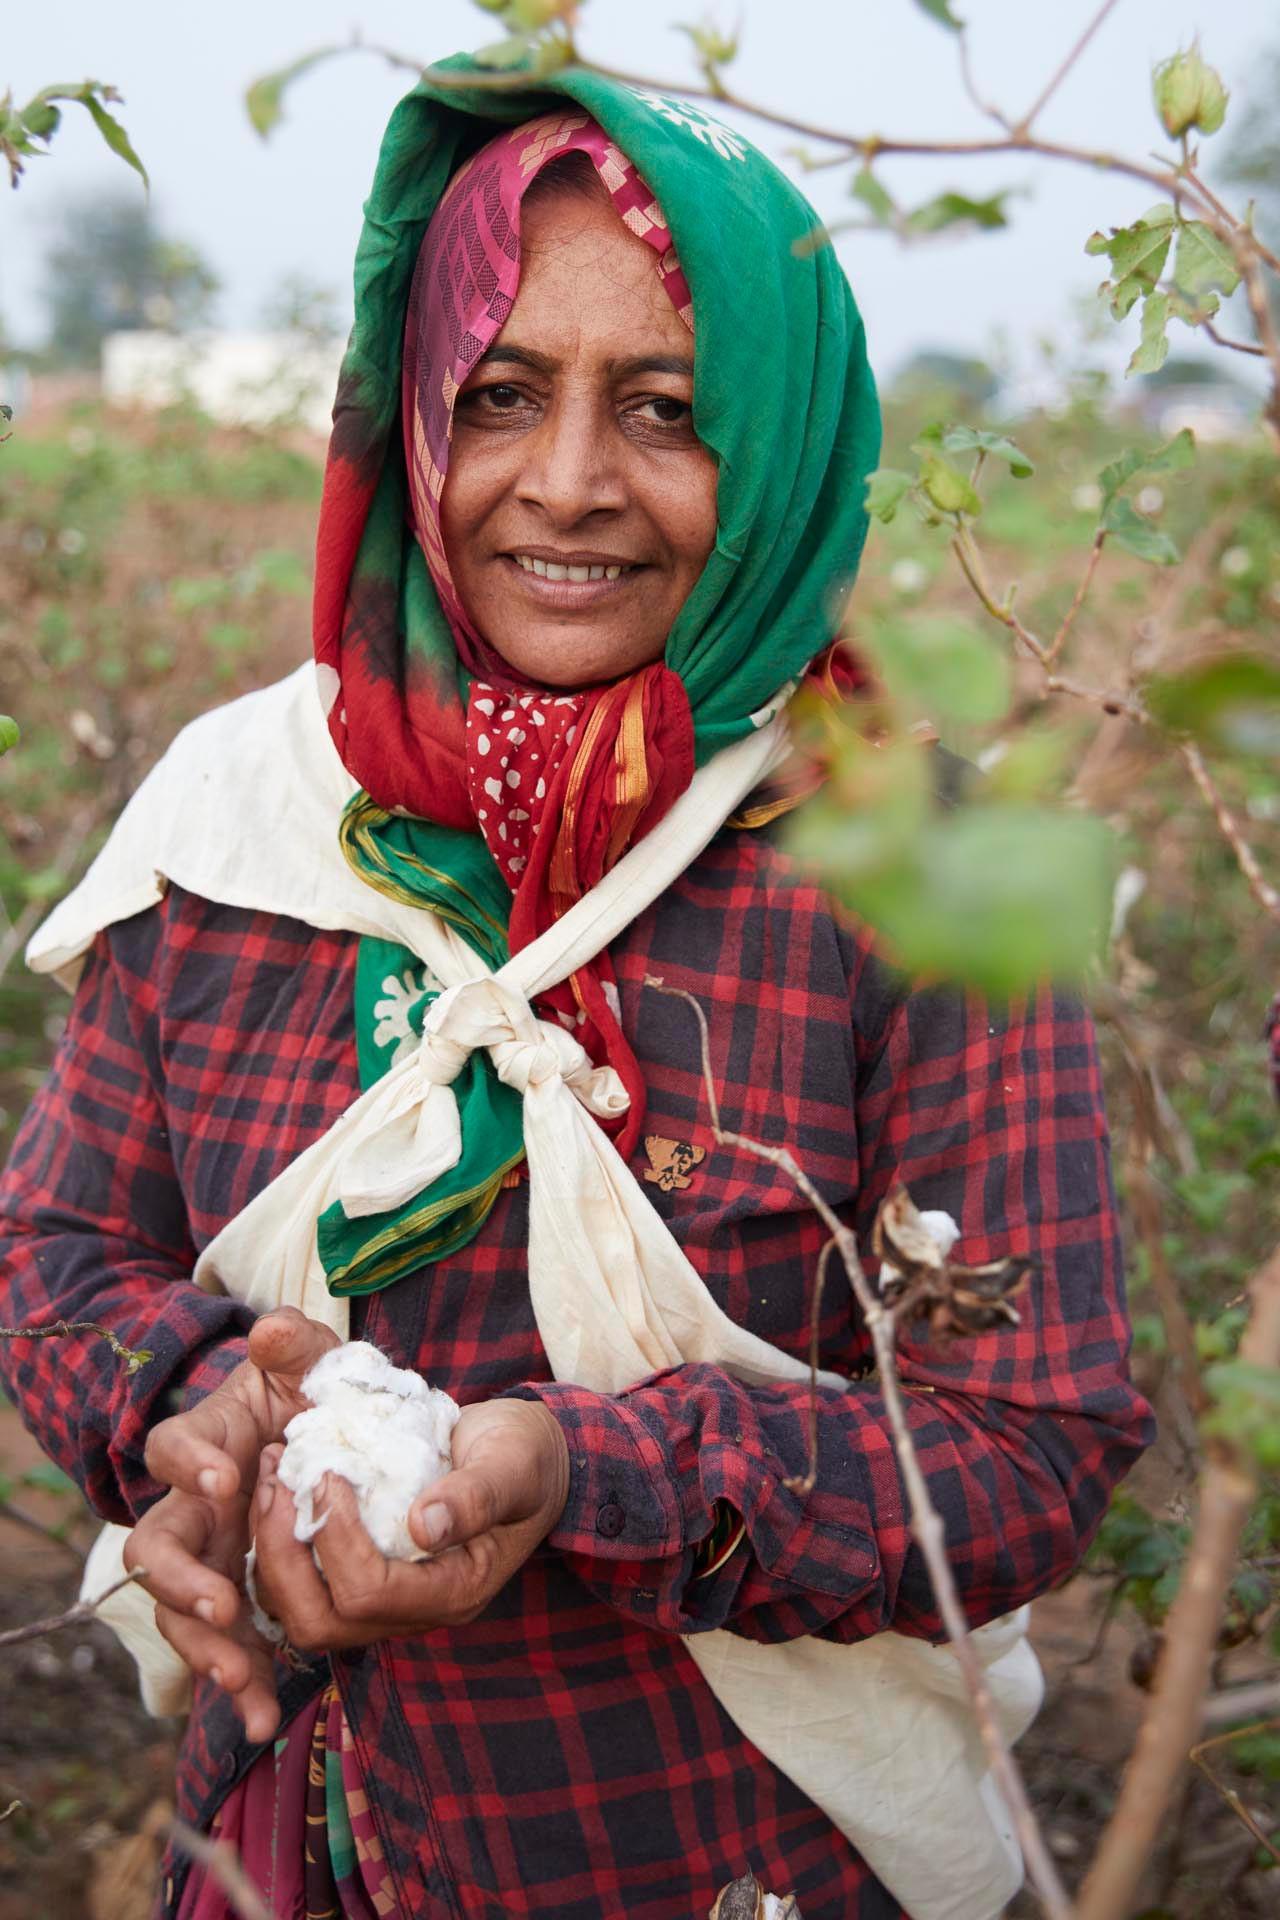 At Primark we're committed to supporting the livelihoods of the people who make our clothes.